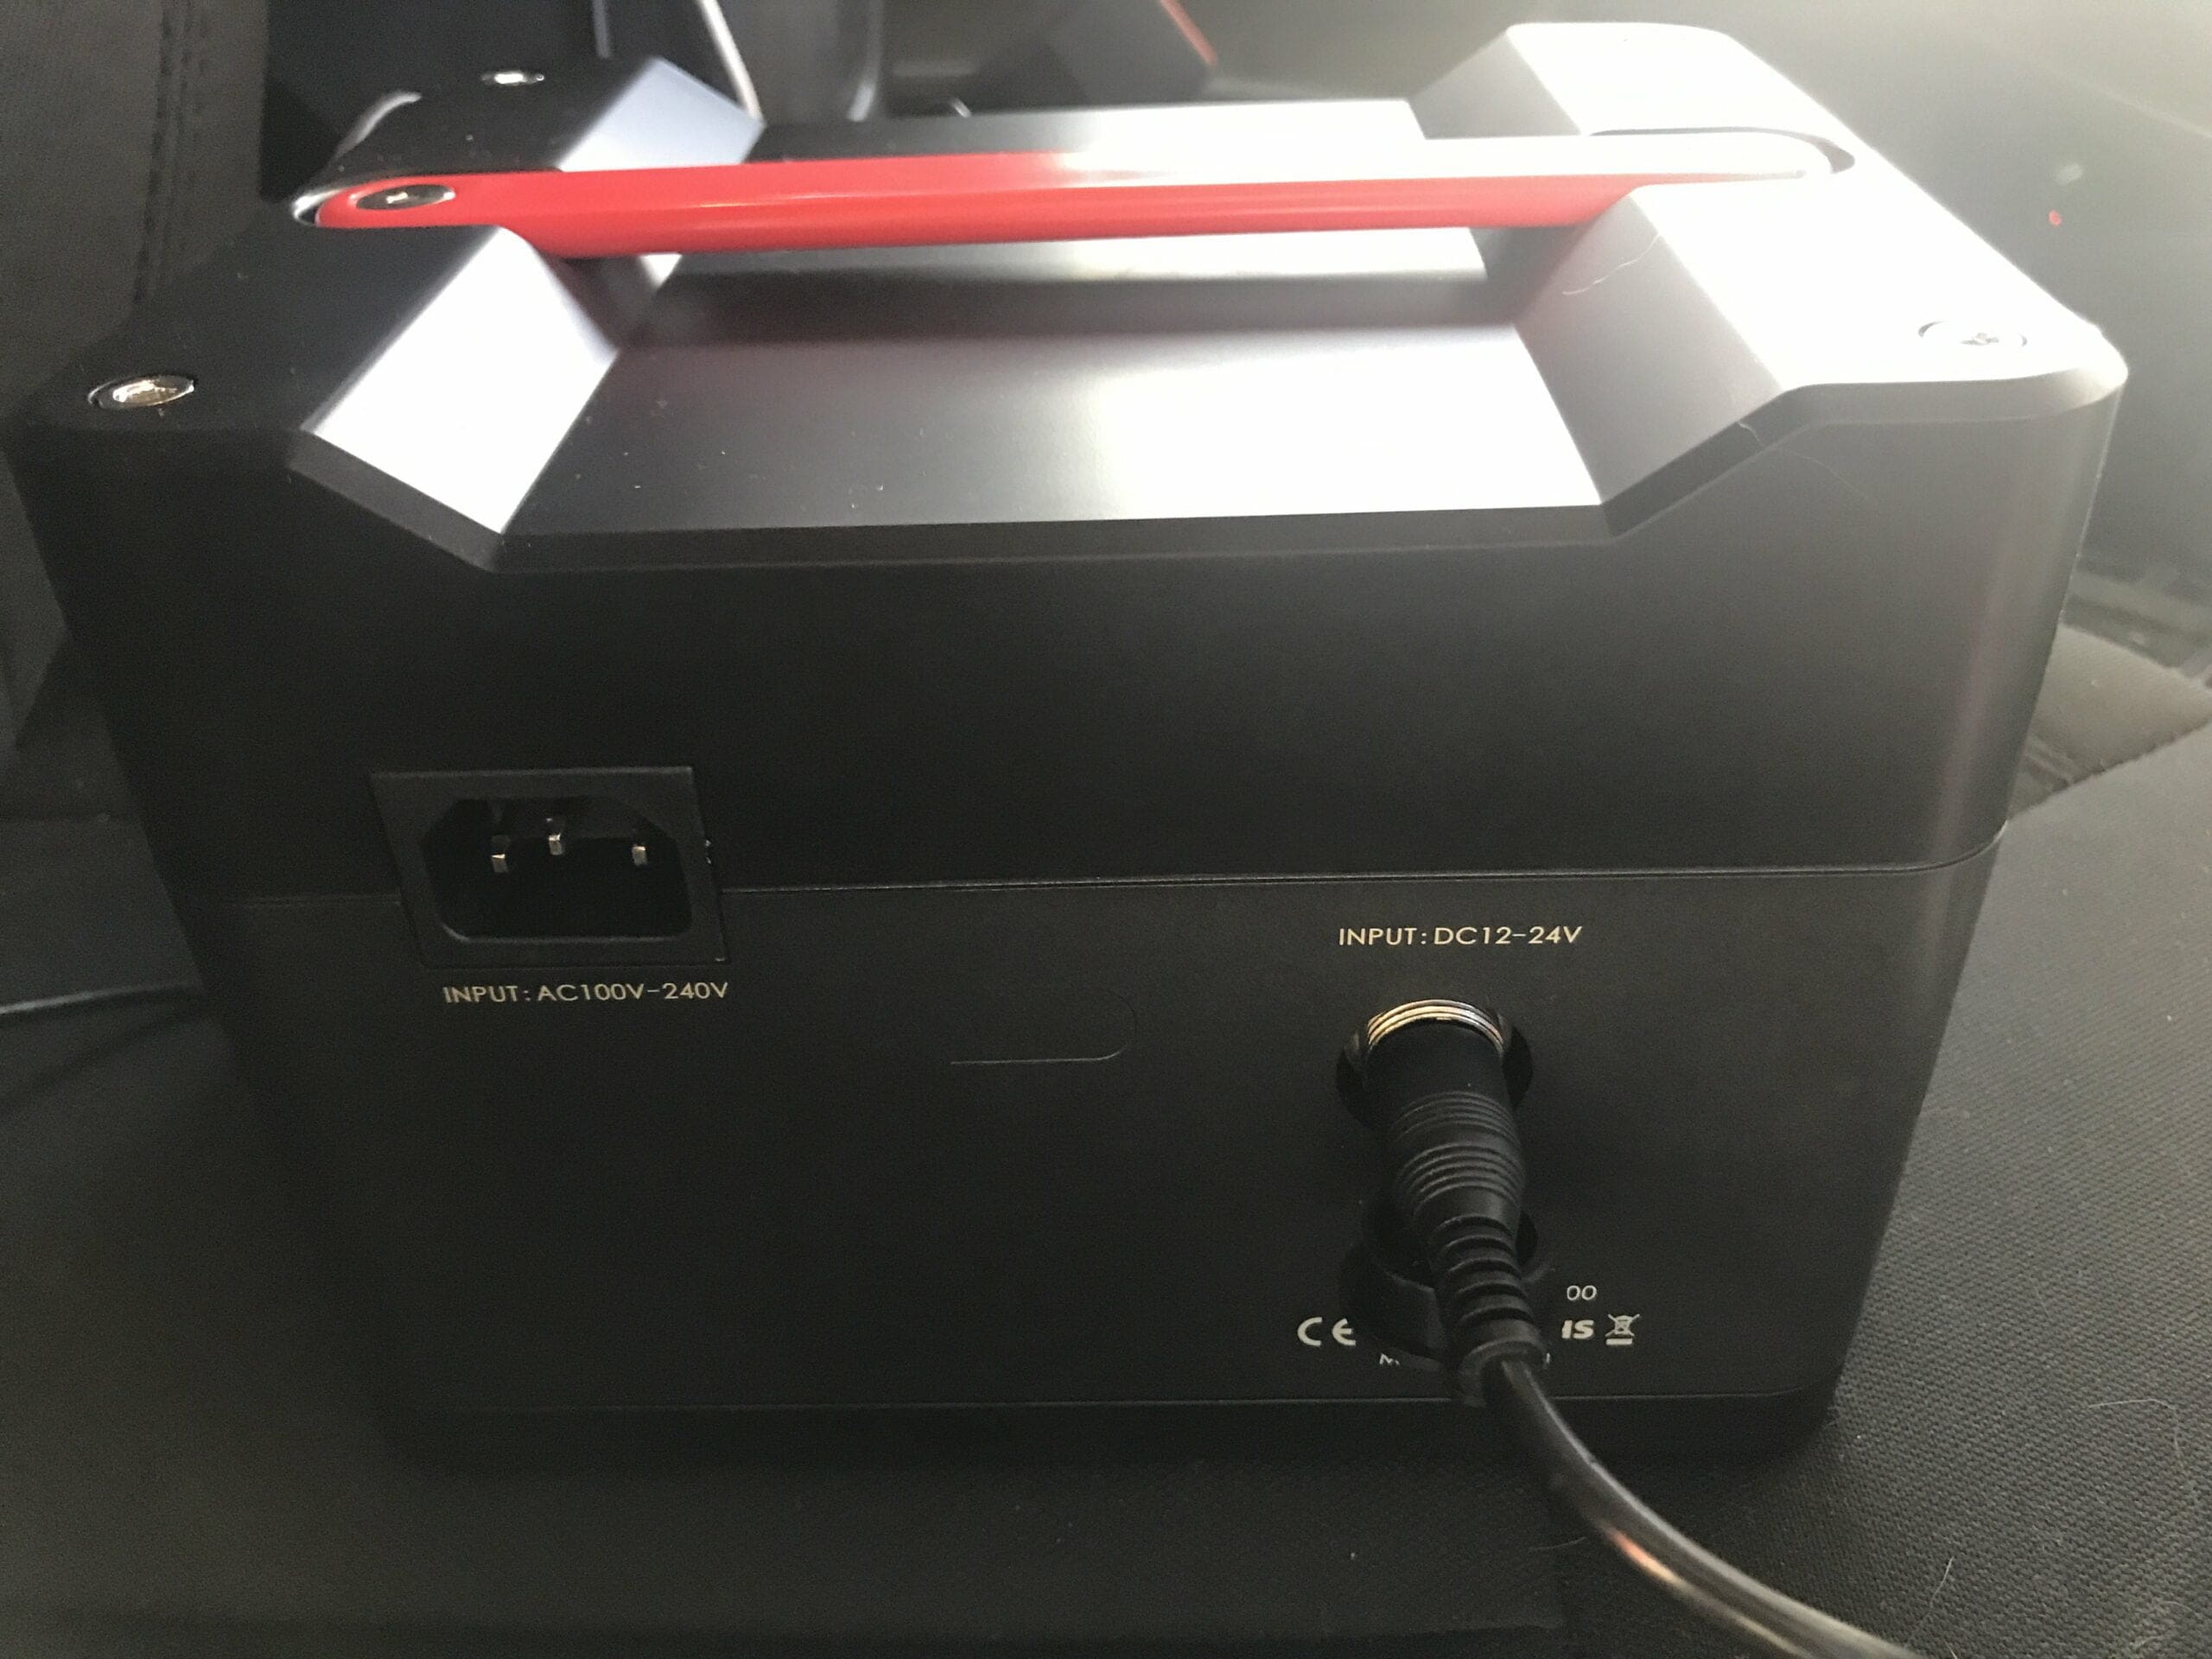 rockpals 300w generator review